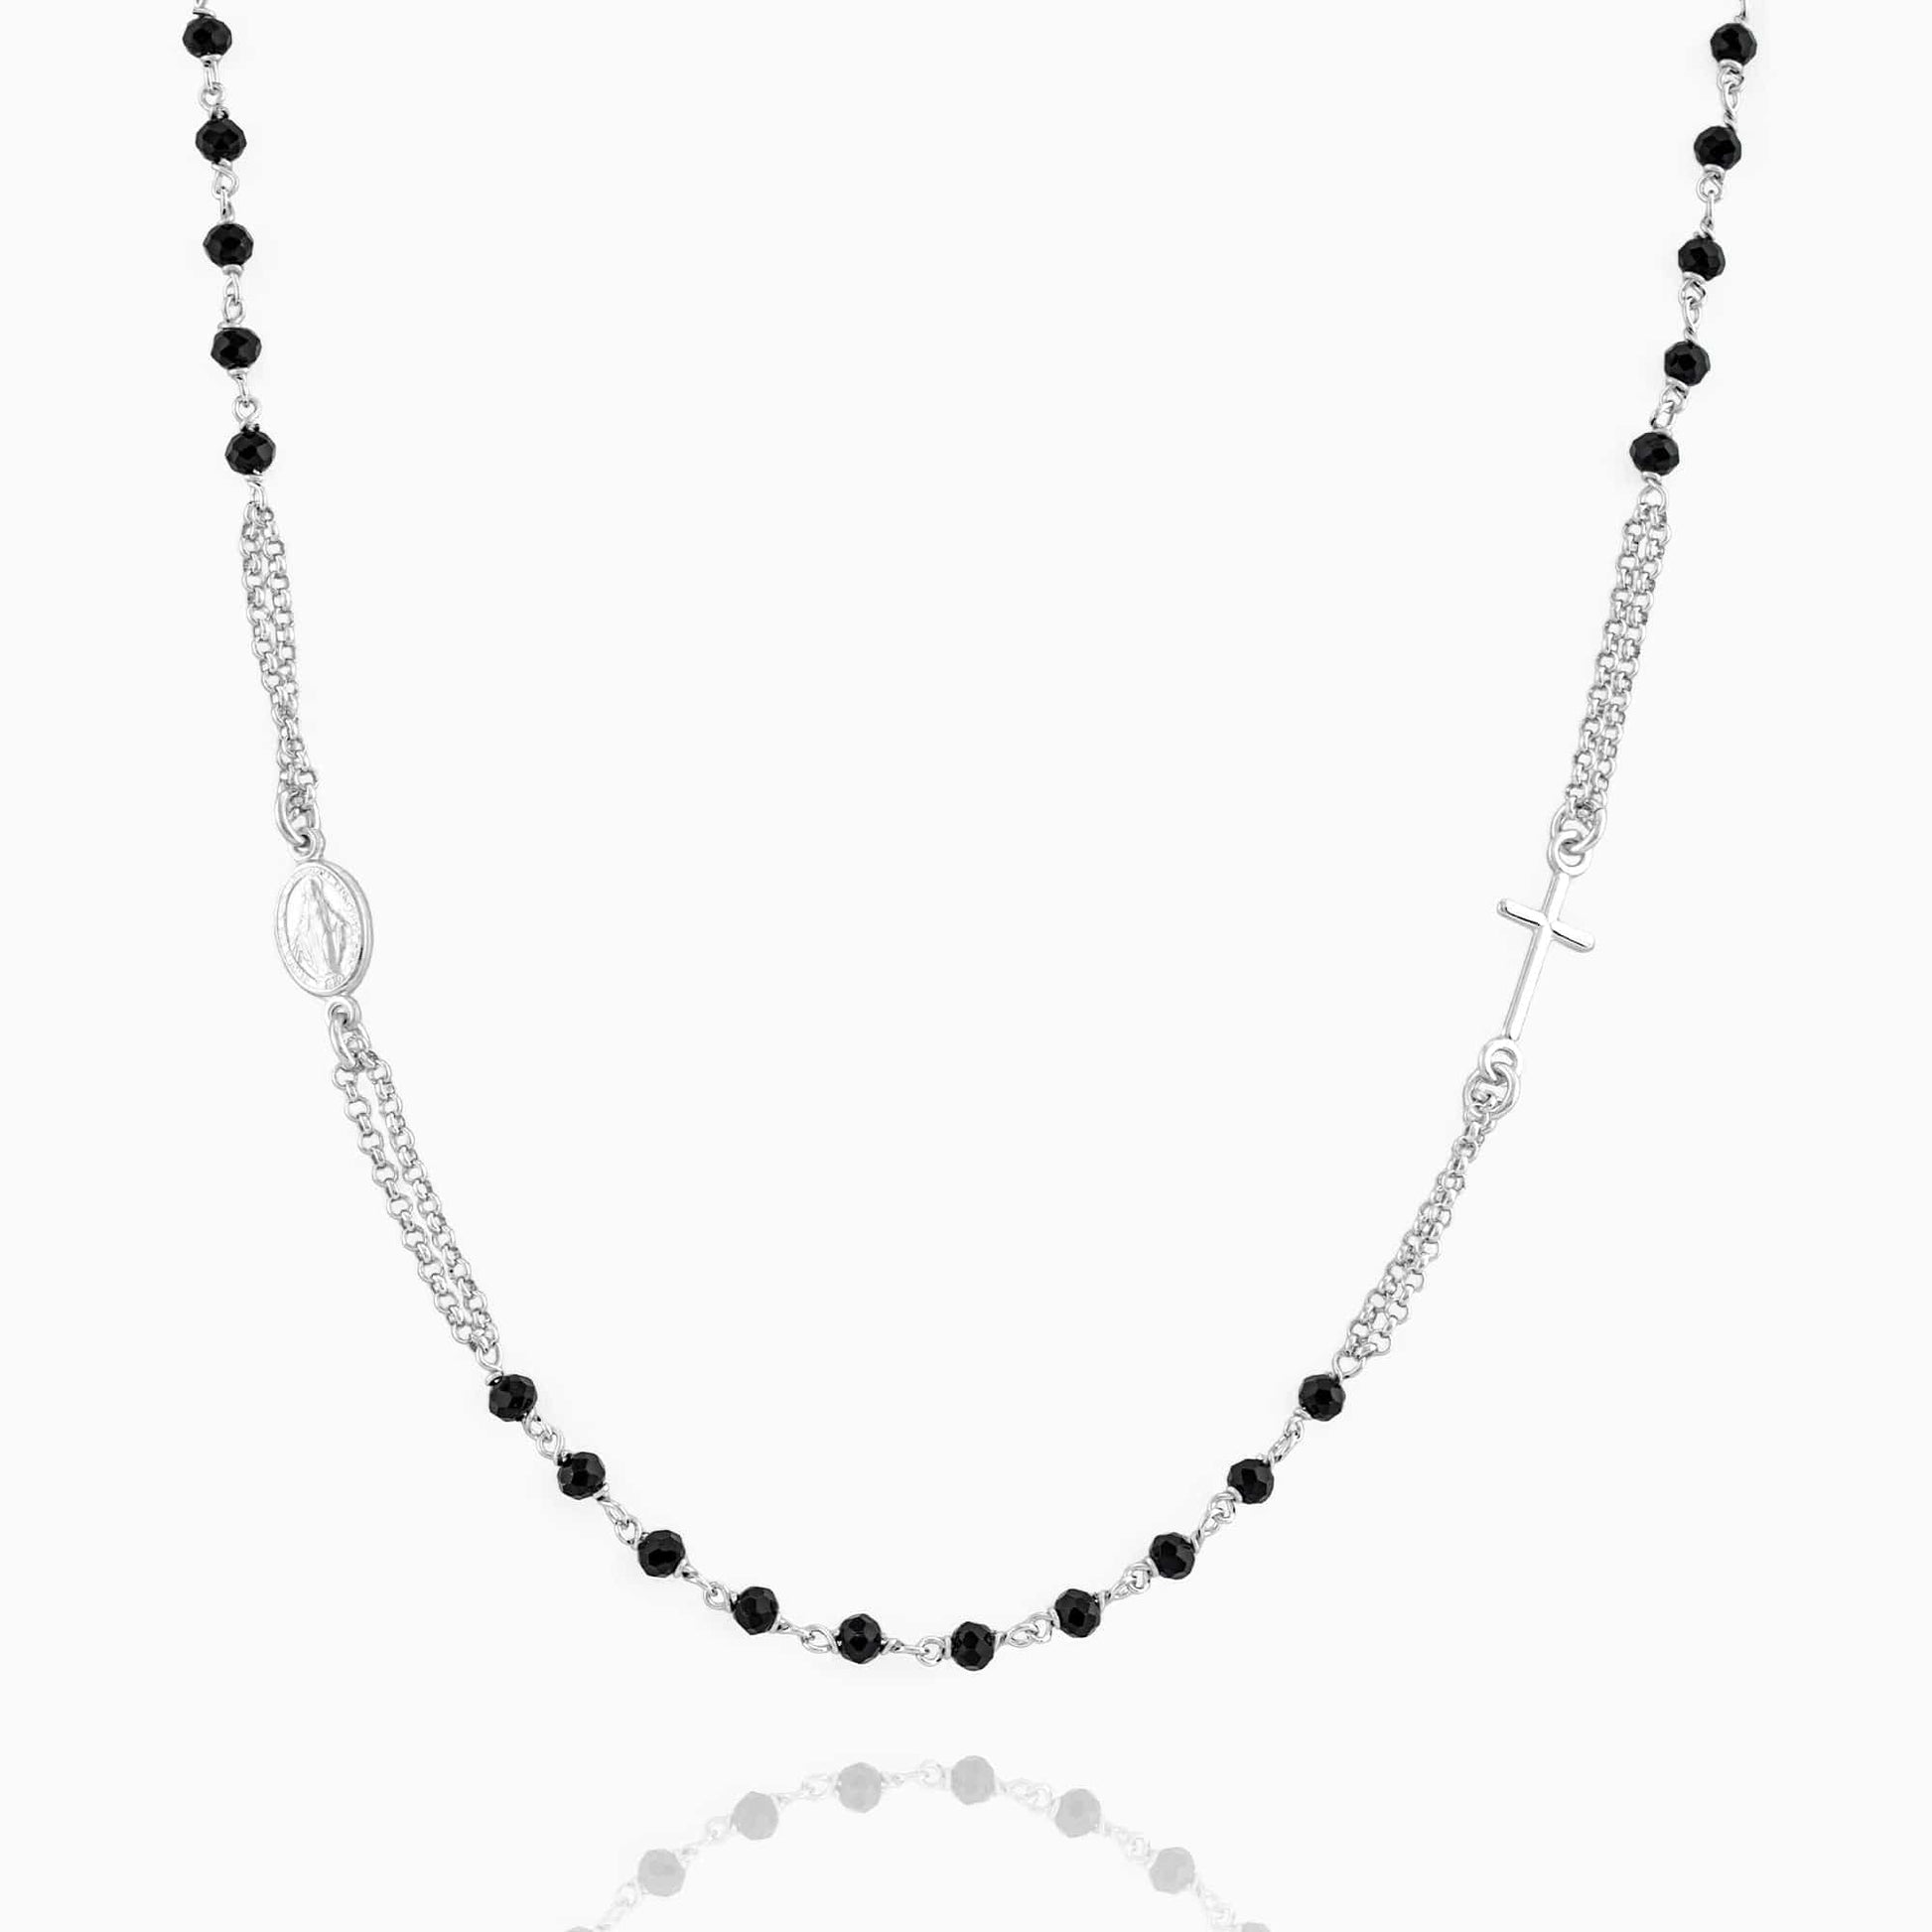 MONDO CATTOLICO Prayer Beads Rhodium / Cm 46+5 (18.1 in+2) STERLING SILVER NECKLACE ROSARY BLACK BEADS